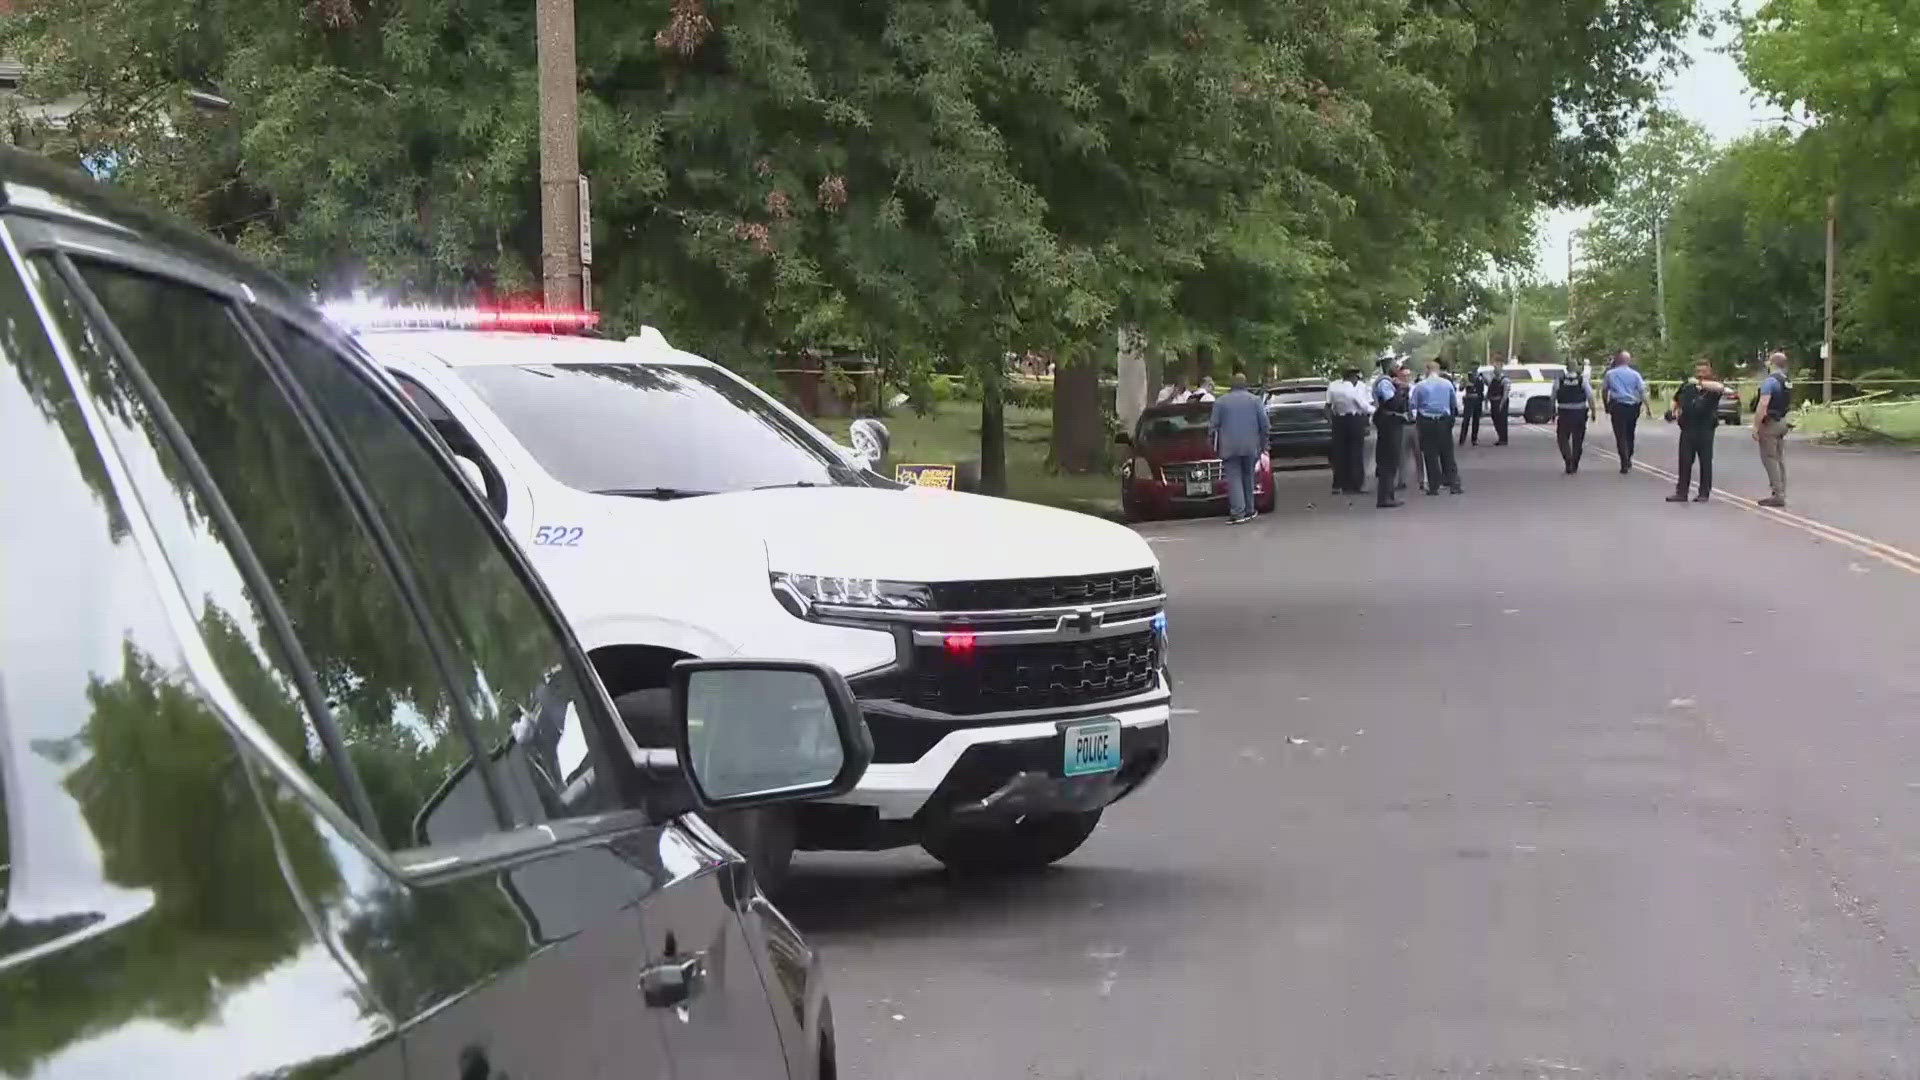 A St. Louis police officer shot and killed a juvenile when he tried pulling a gun on them. This all started when police were pursuing a stolen car Tuesday afternoon.